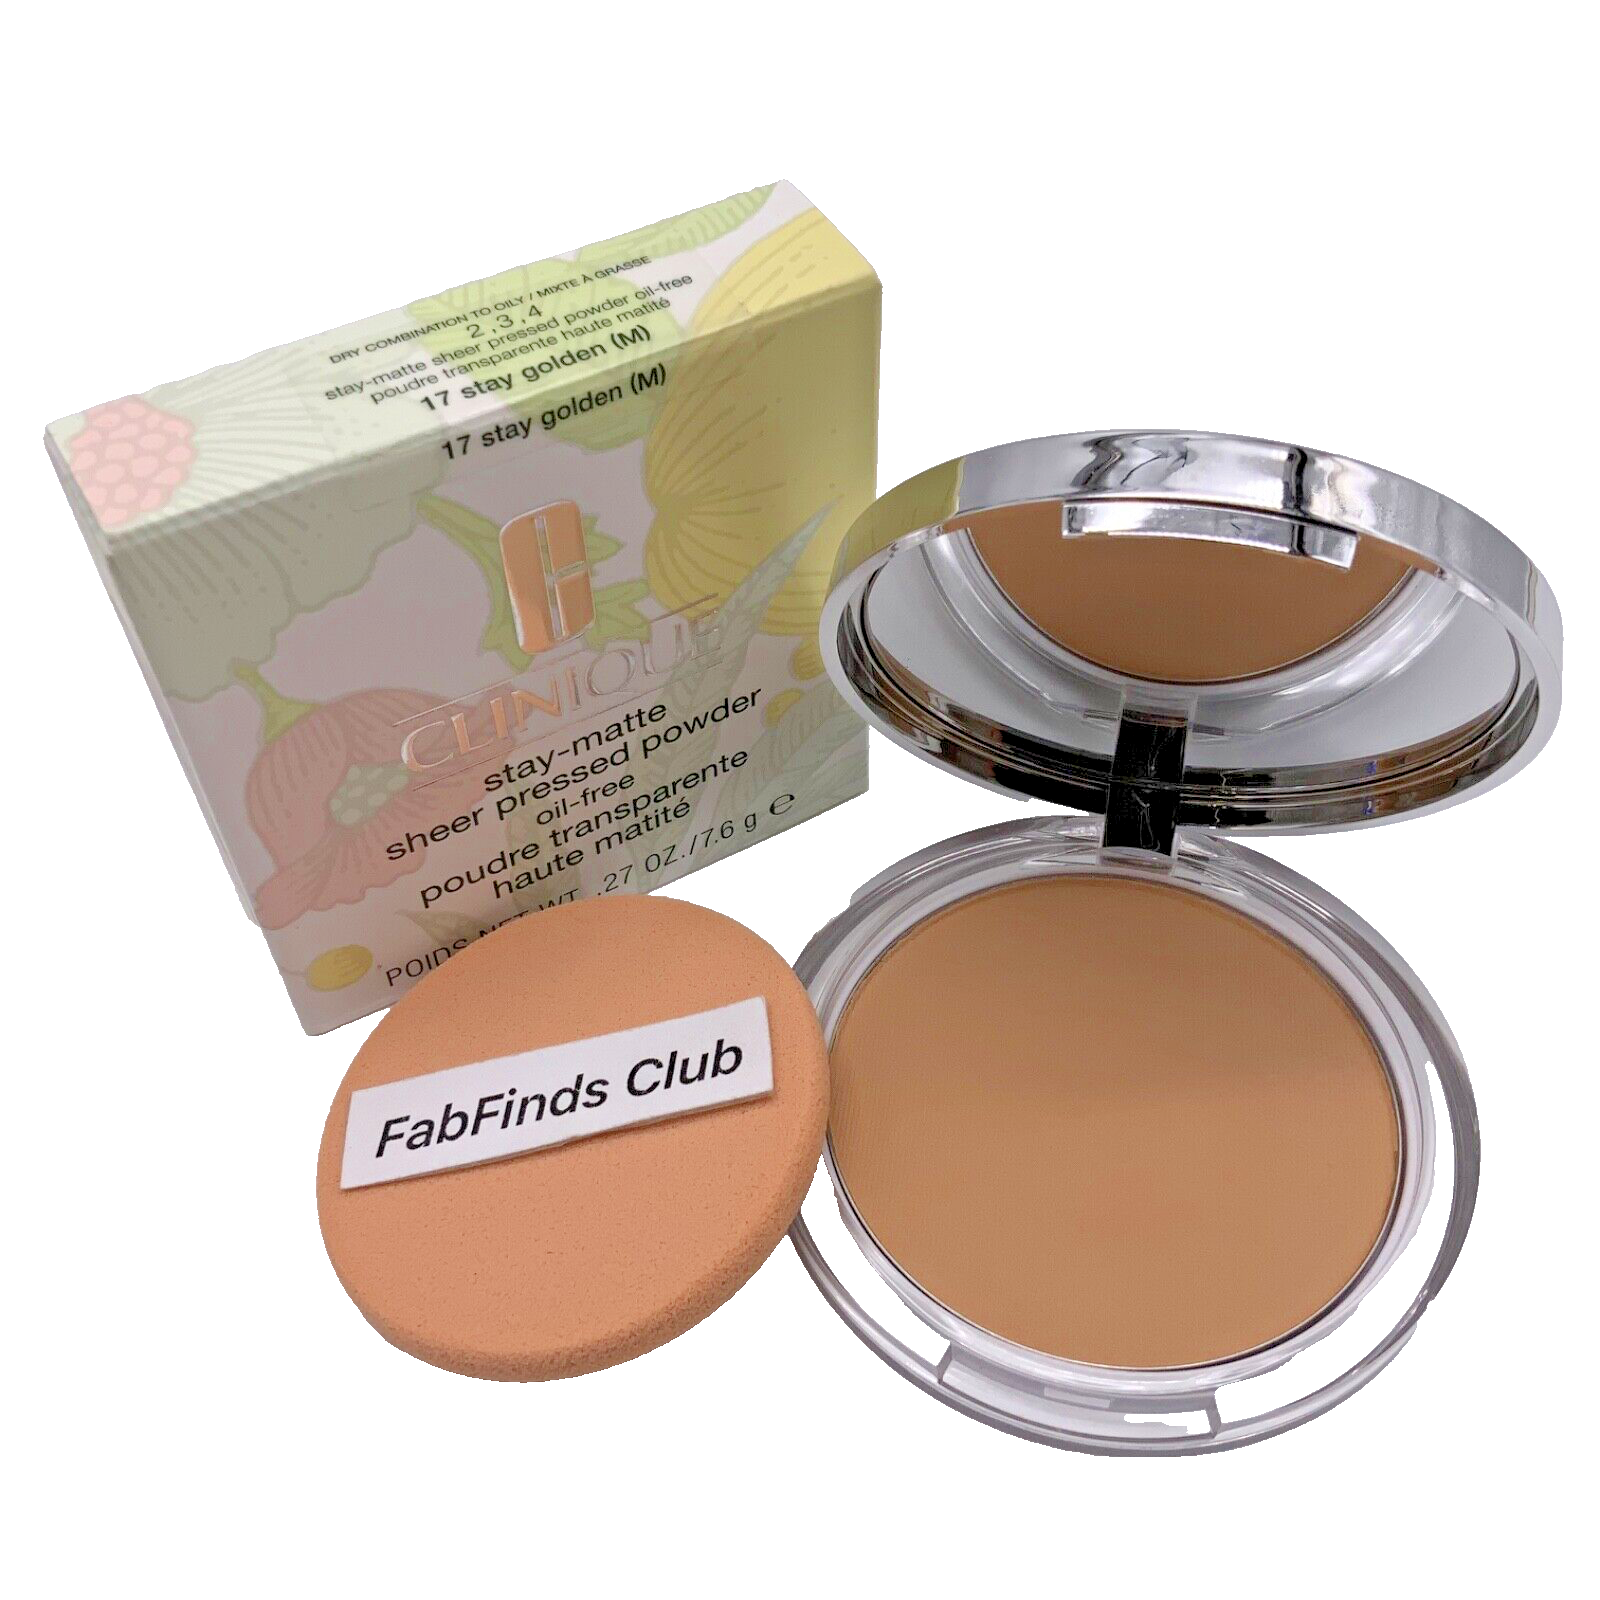 Clinique Stay Matte Sheer Pressed Powder #17 Stay Golden Oil Free New In Box - $27.70